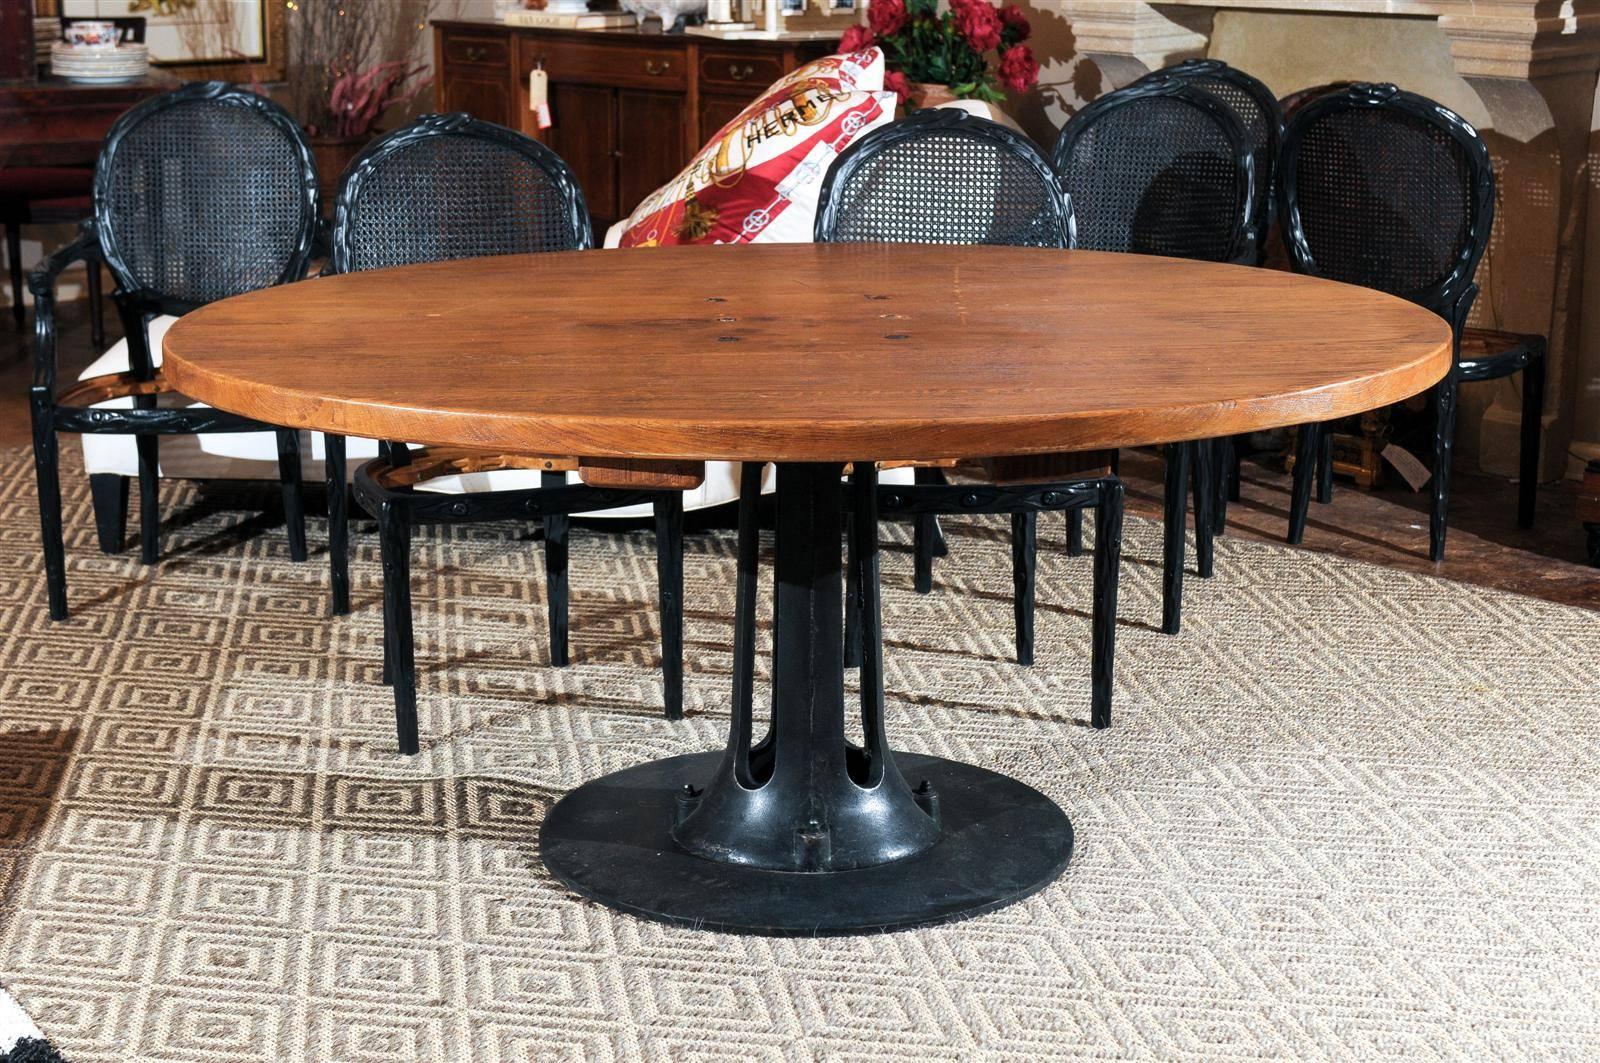 A wonderful Industrial table which would be a great dining table or many other uses. The base is cast iron with the original manufacturers plate. The 2 in. oak top is put together with bolts which can be seen in the picture. All original.